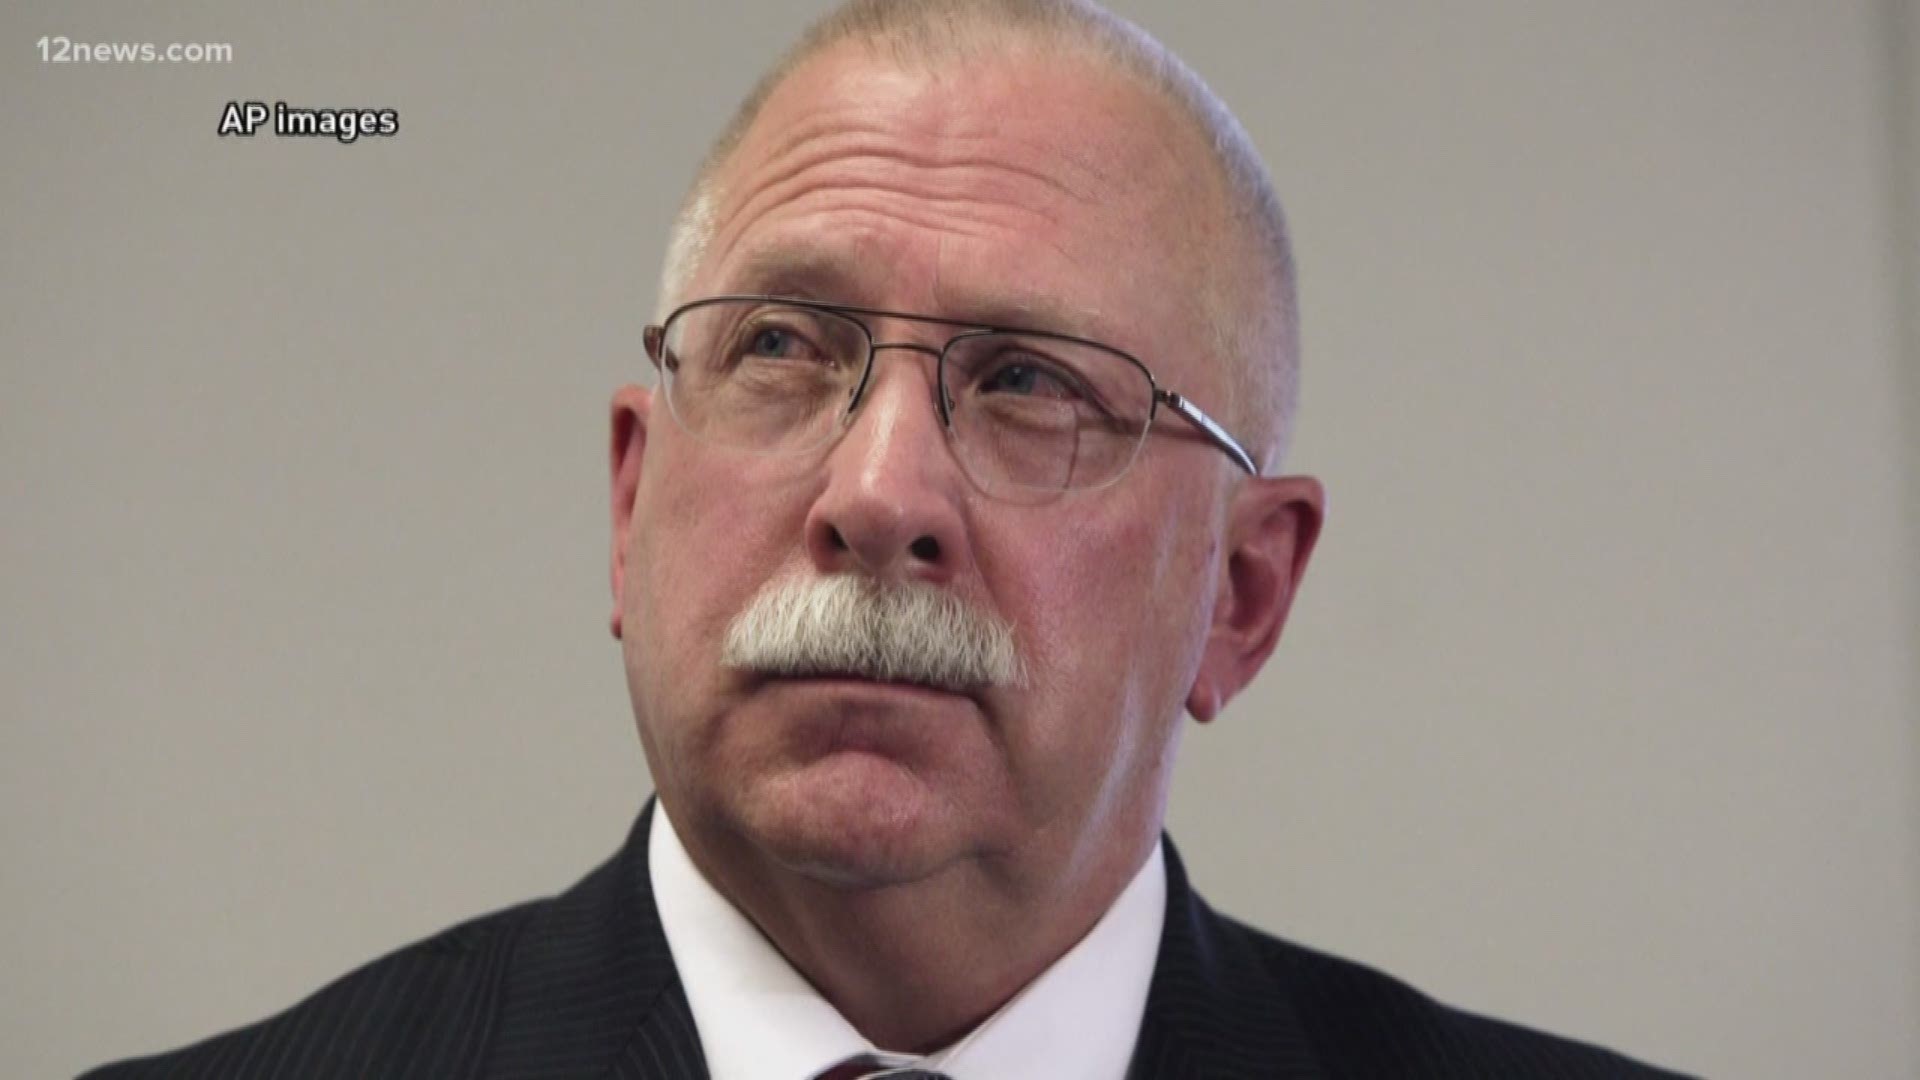 The Arizona Department of Corrections director is resigning in September. In an email sent to all his staff Friday, Charles Ryan said he will be stepping down effective Sept. 13.